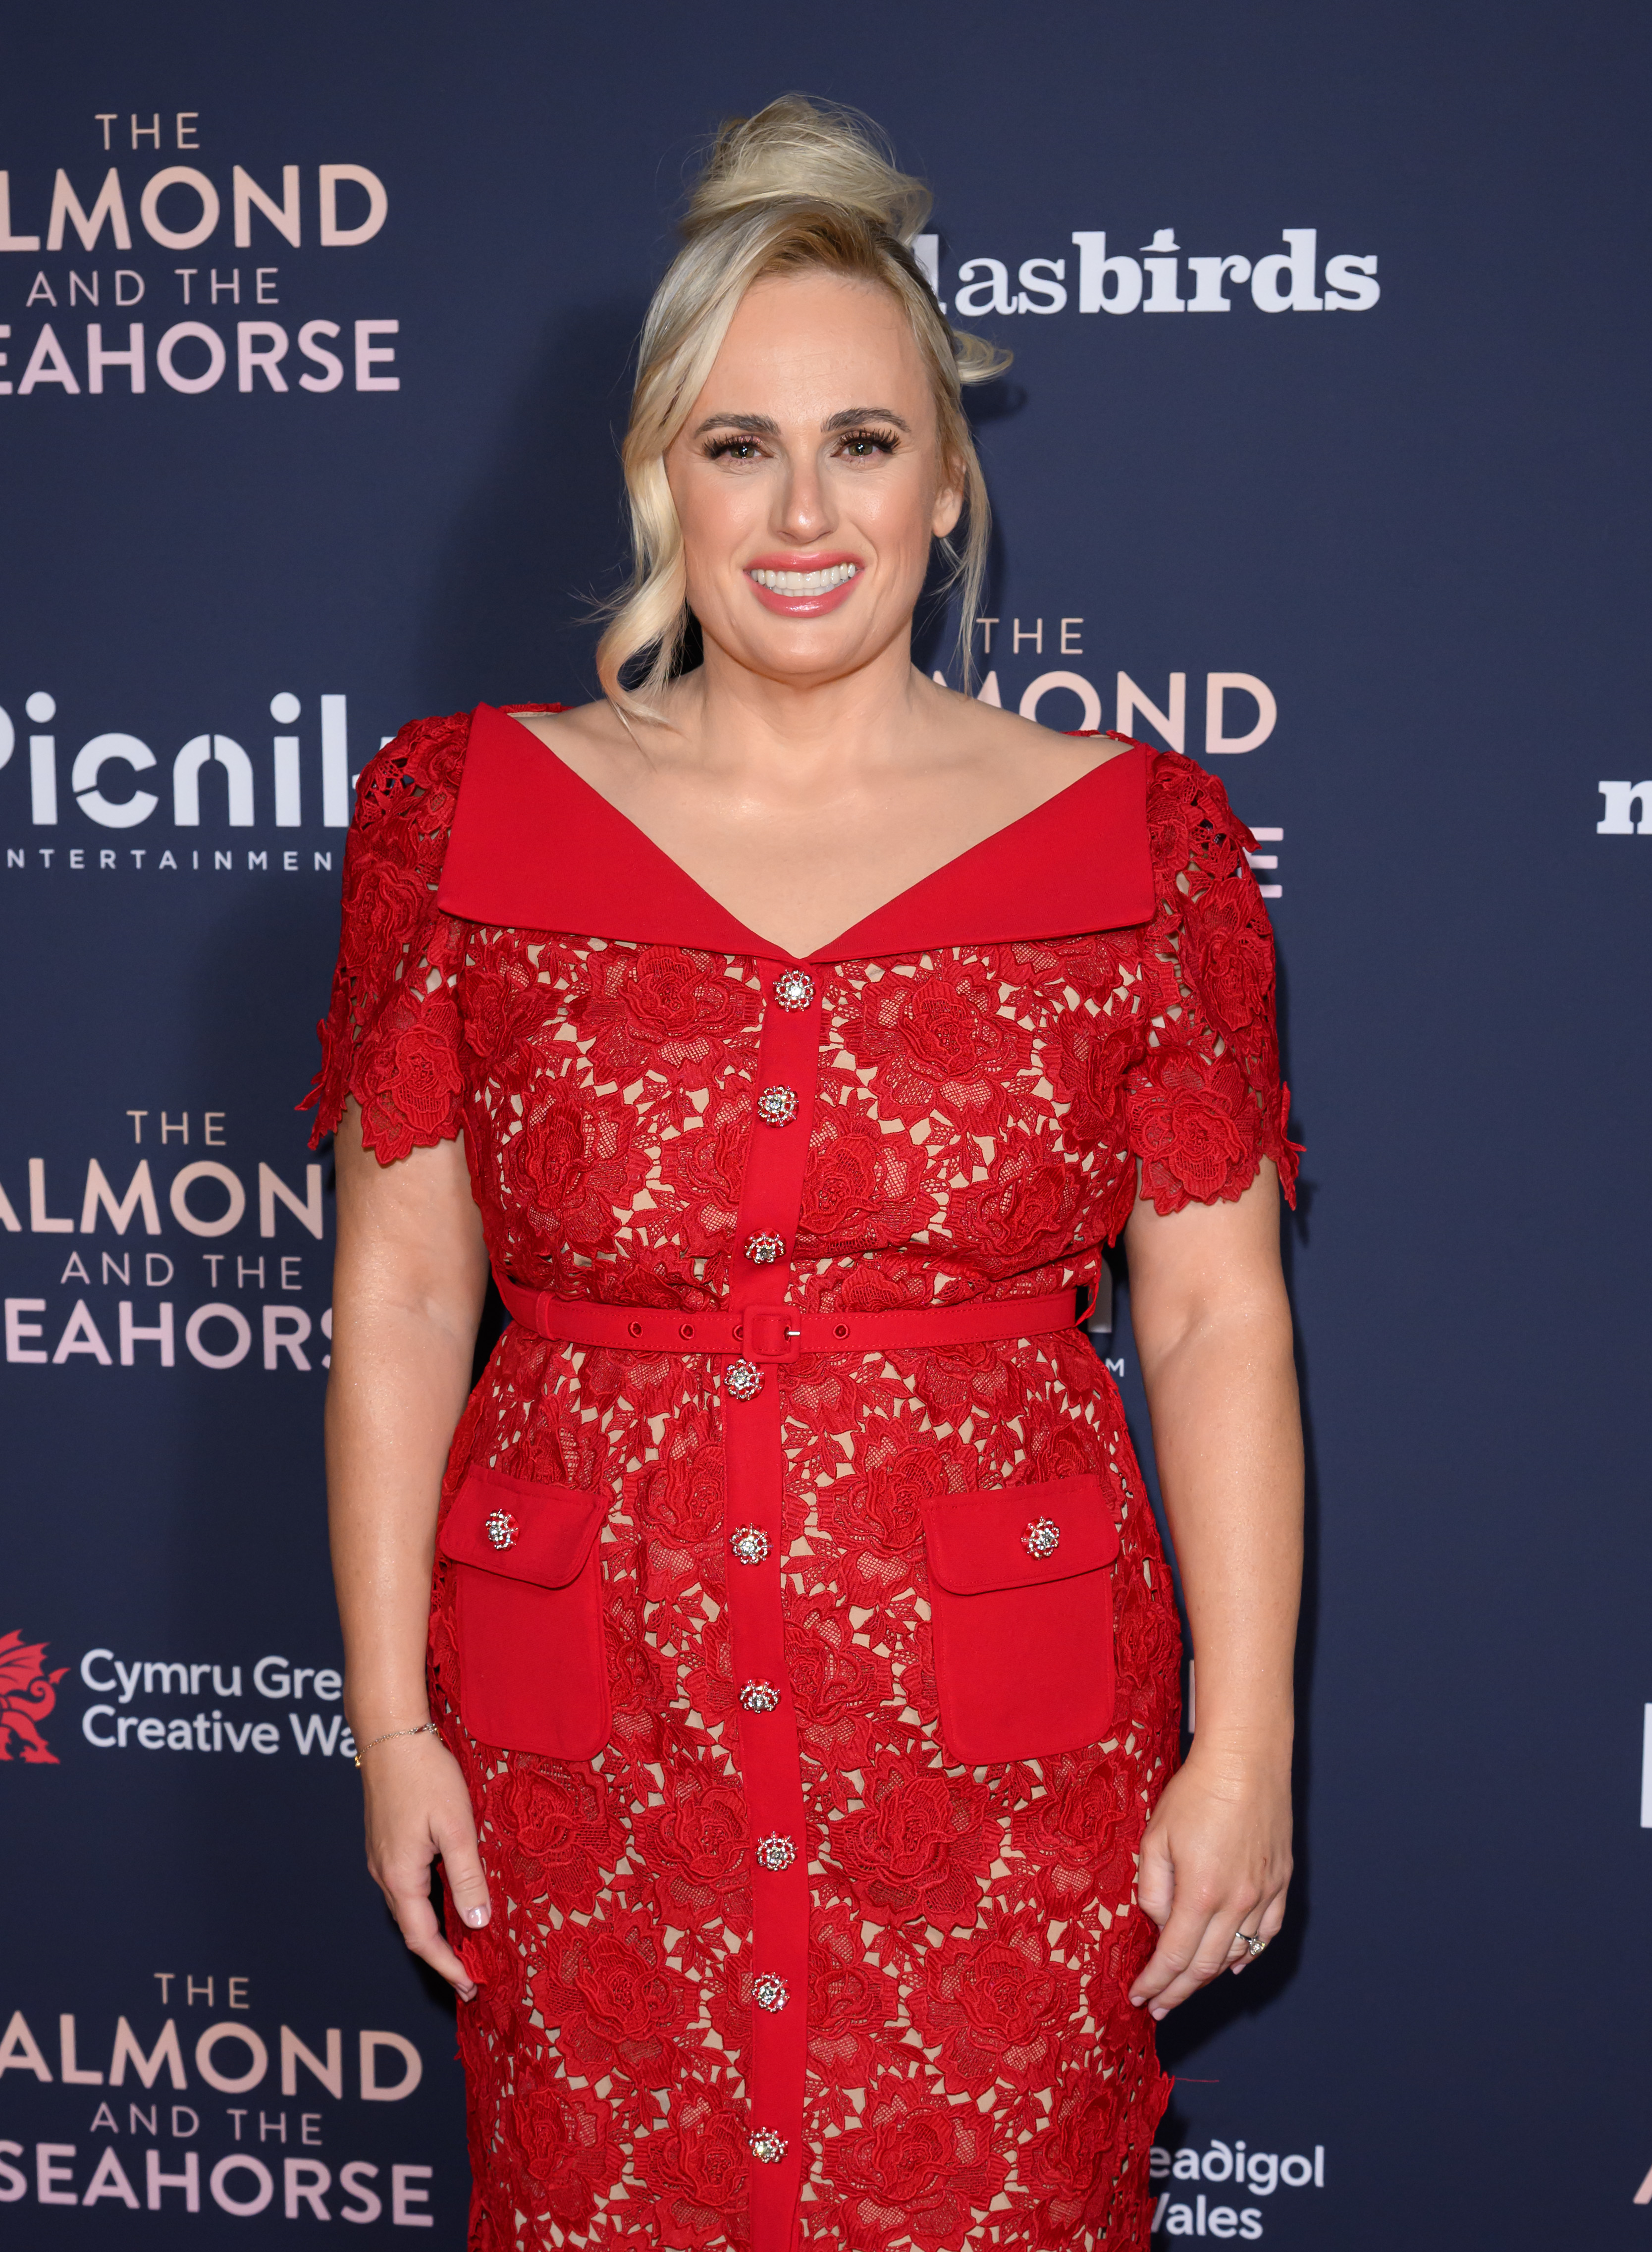 Rebel Wilson in a red lace dress with sheer sleeves at a media event